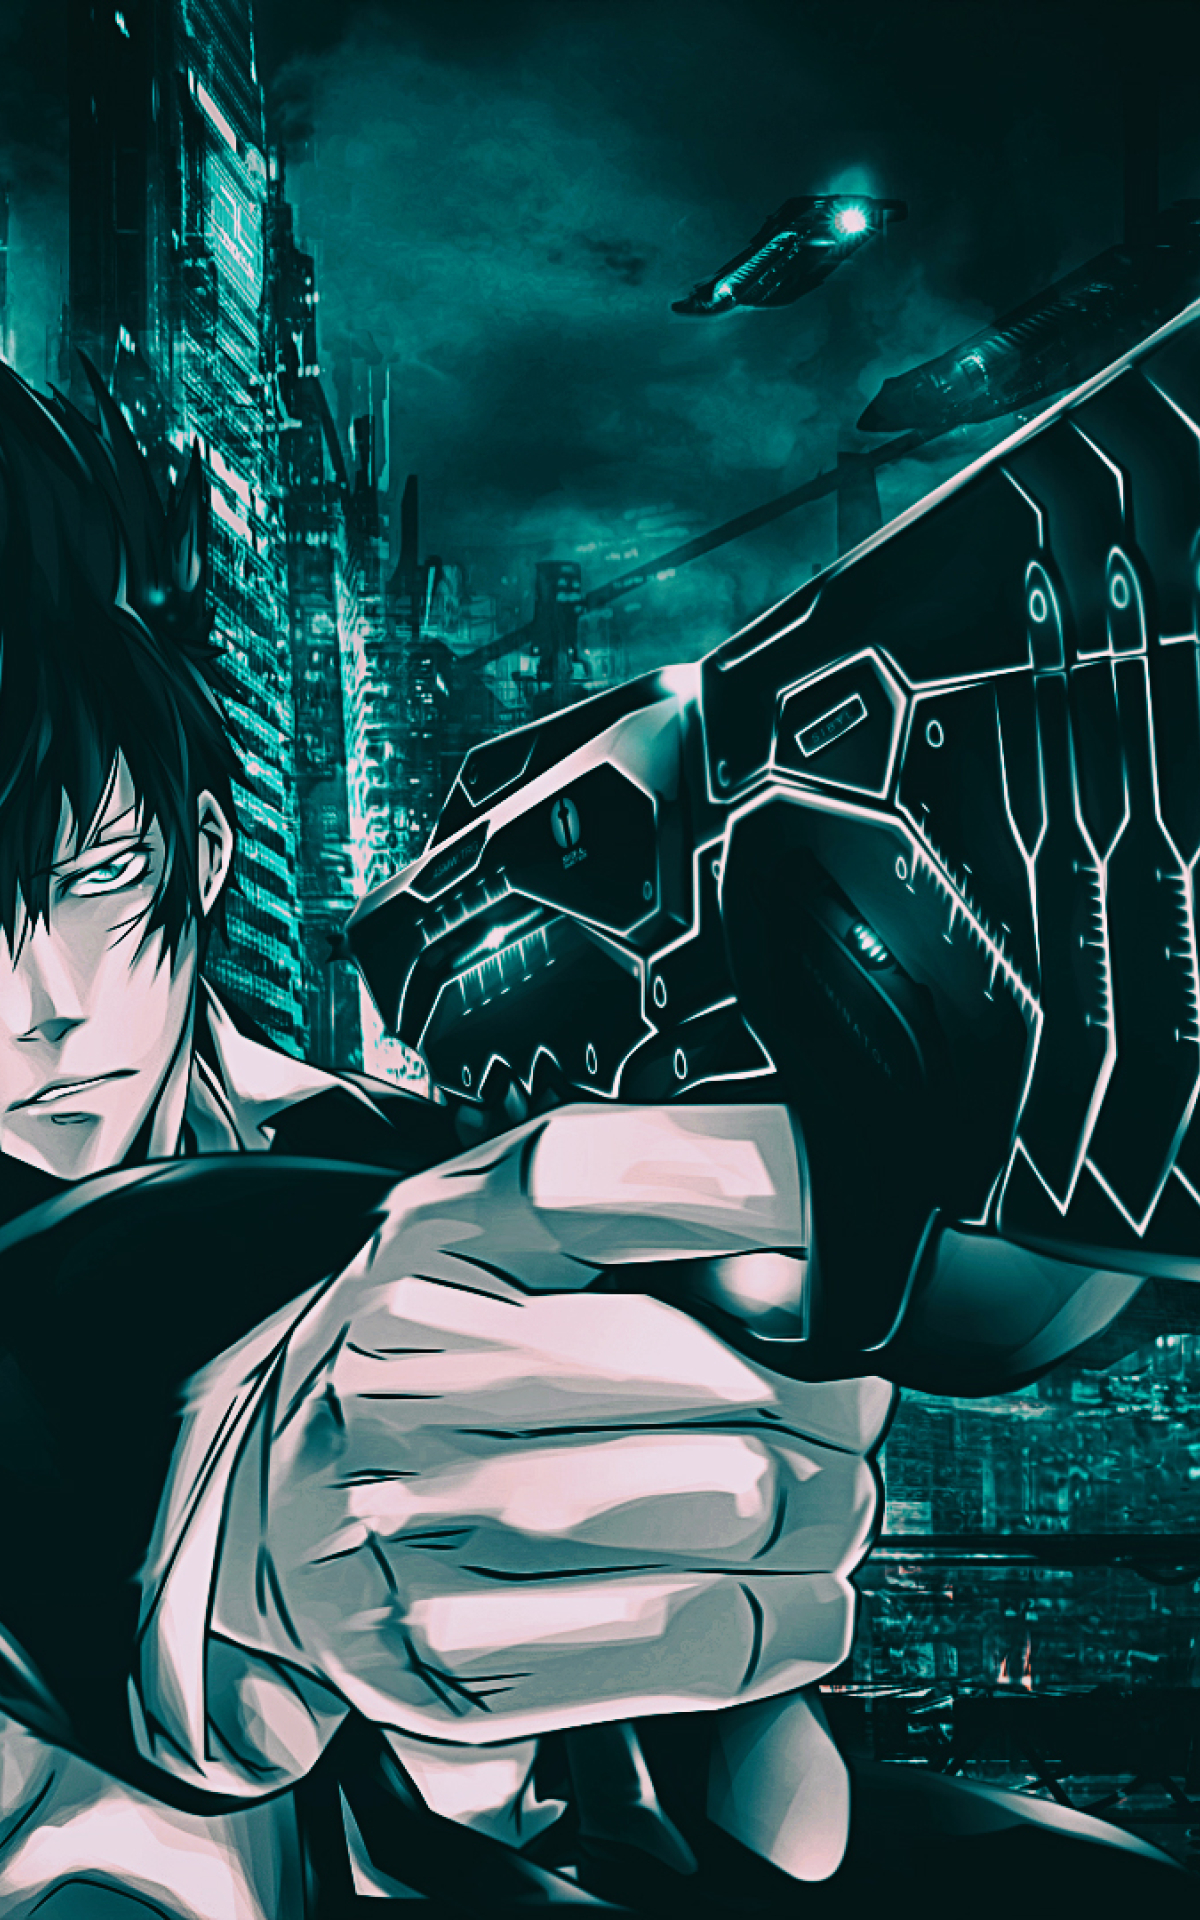 10x19 Shinya Kogami From Psycho Pass 10x19 Resolution Wallpaper Hd Anime 4k Wallpapers Images Photos And Background Wallpapers Den